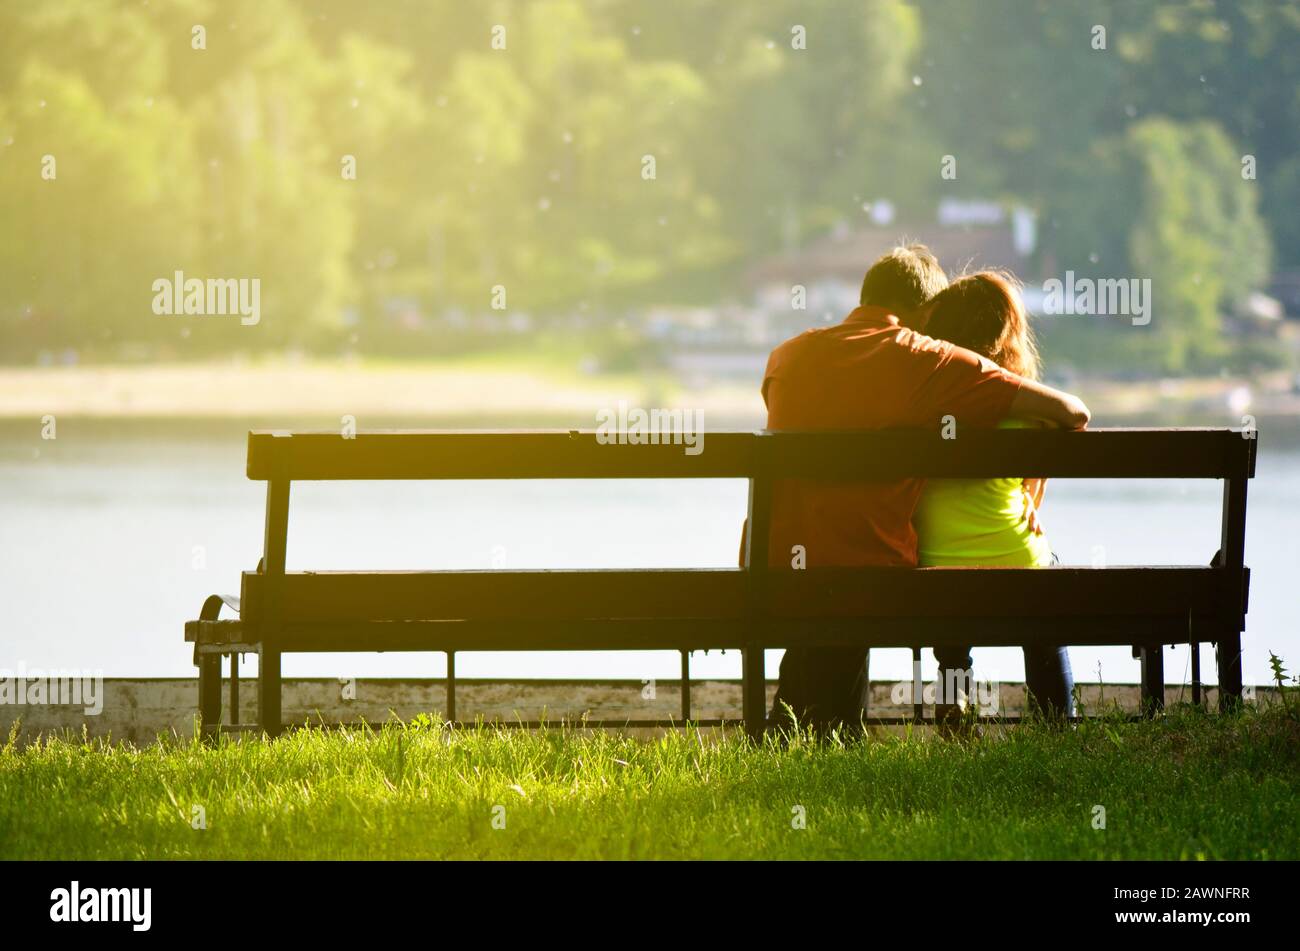 Rear view of a young couple sitting on a park bench. Romantic silhouette of people in love. Stock Photo